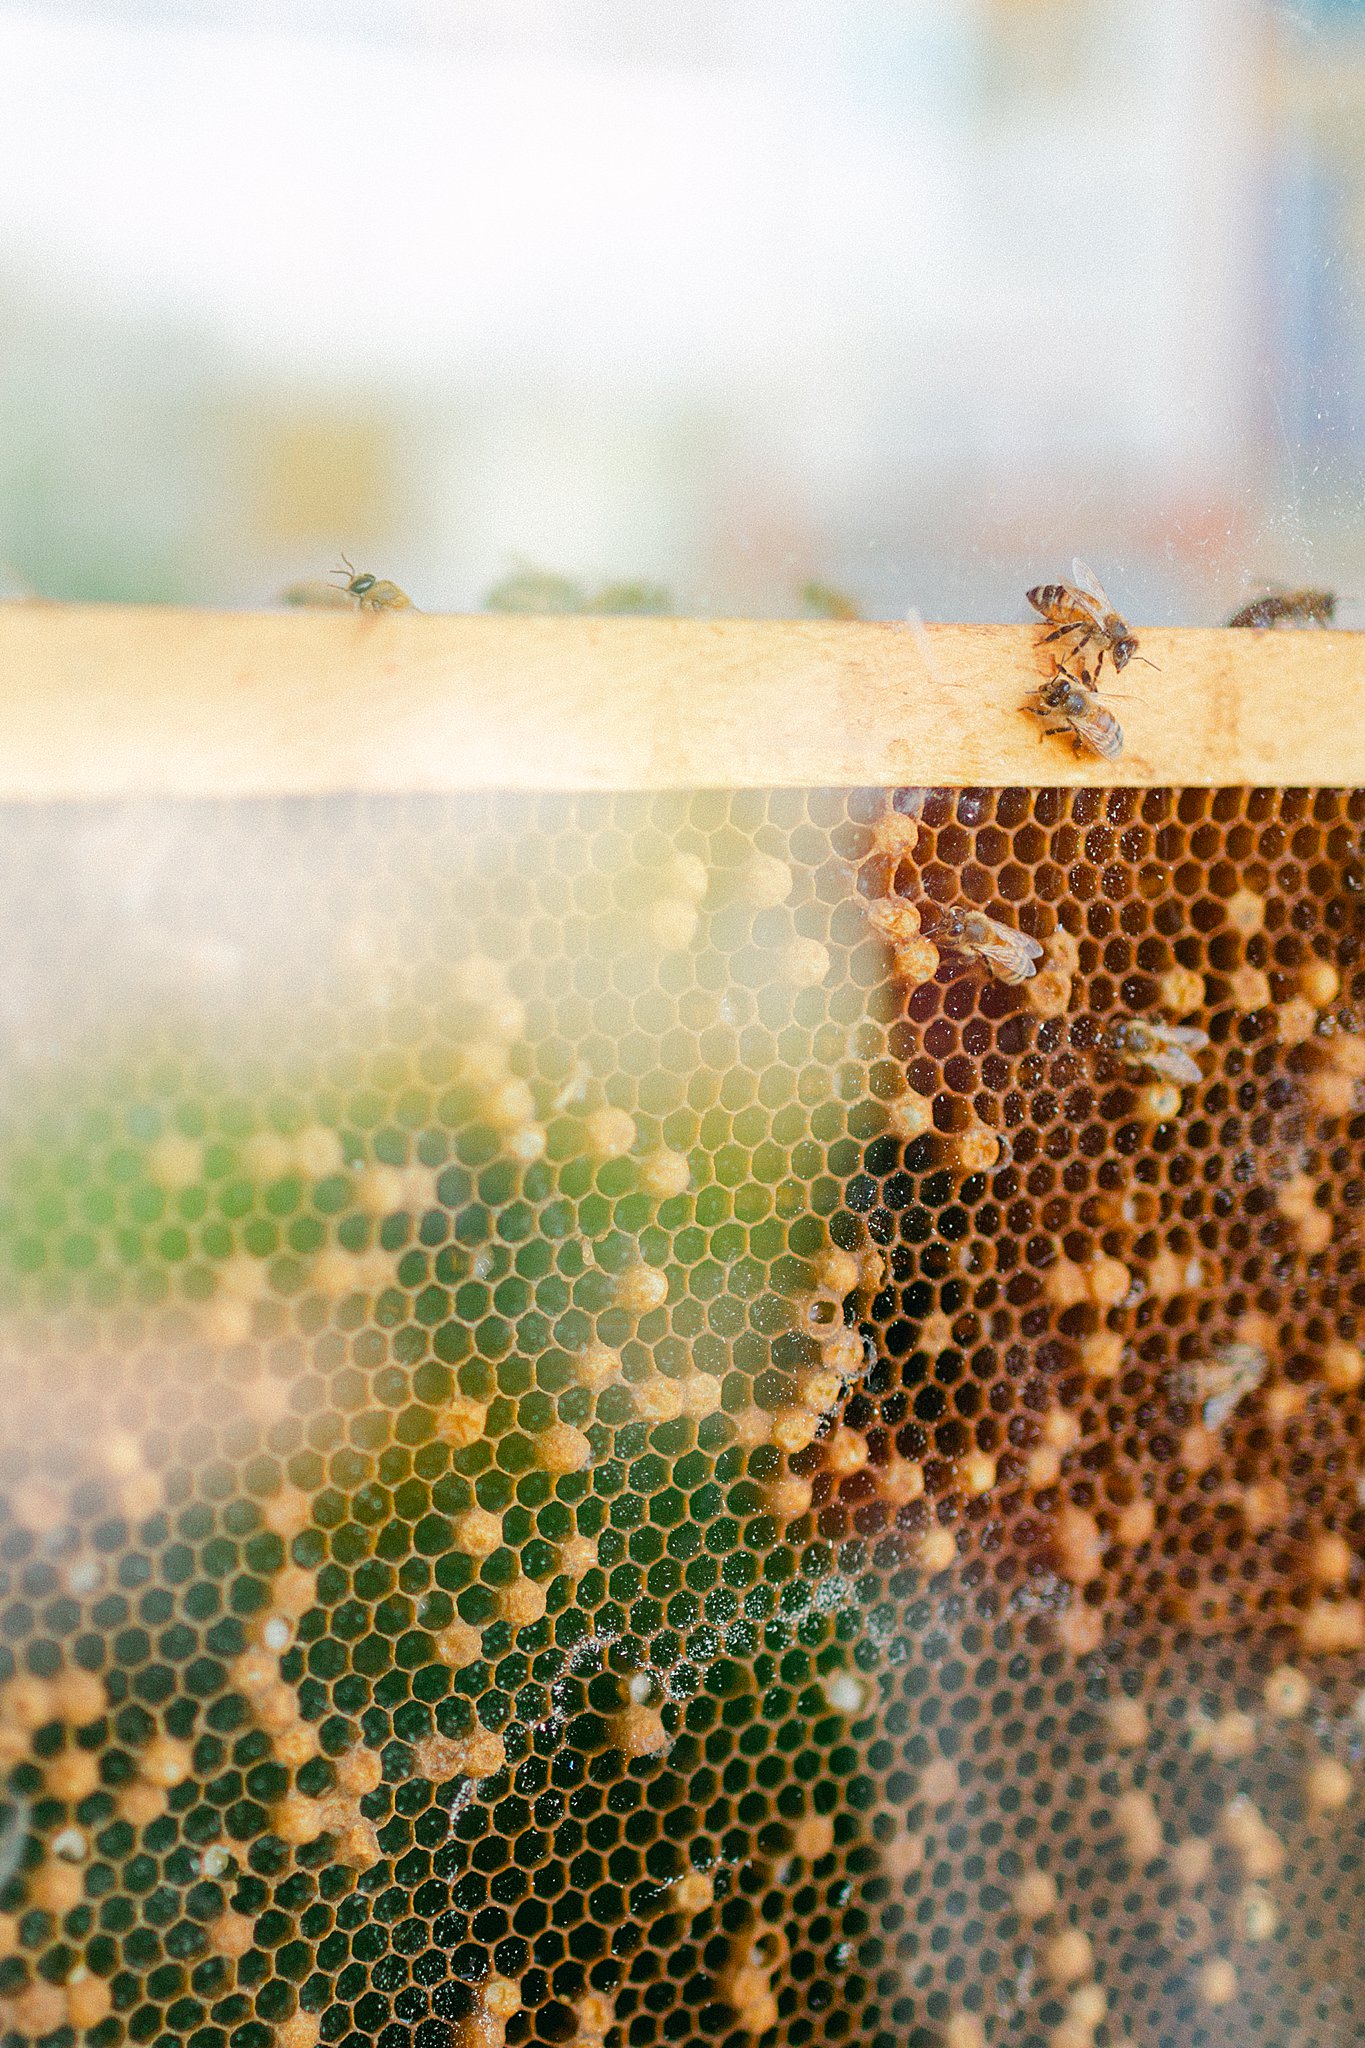 Looking for the Queen Bee in the hive at the Honey Harvest at Crossroads